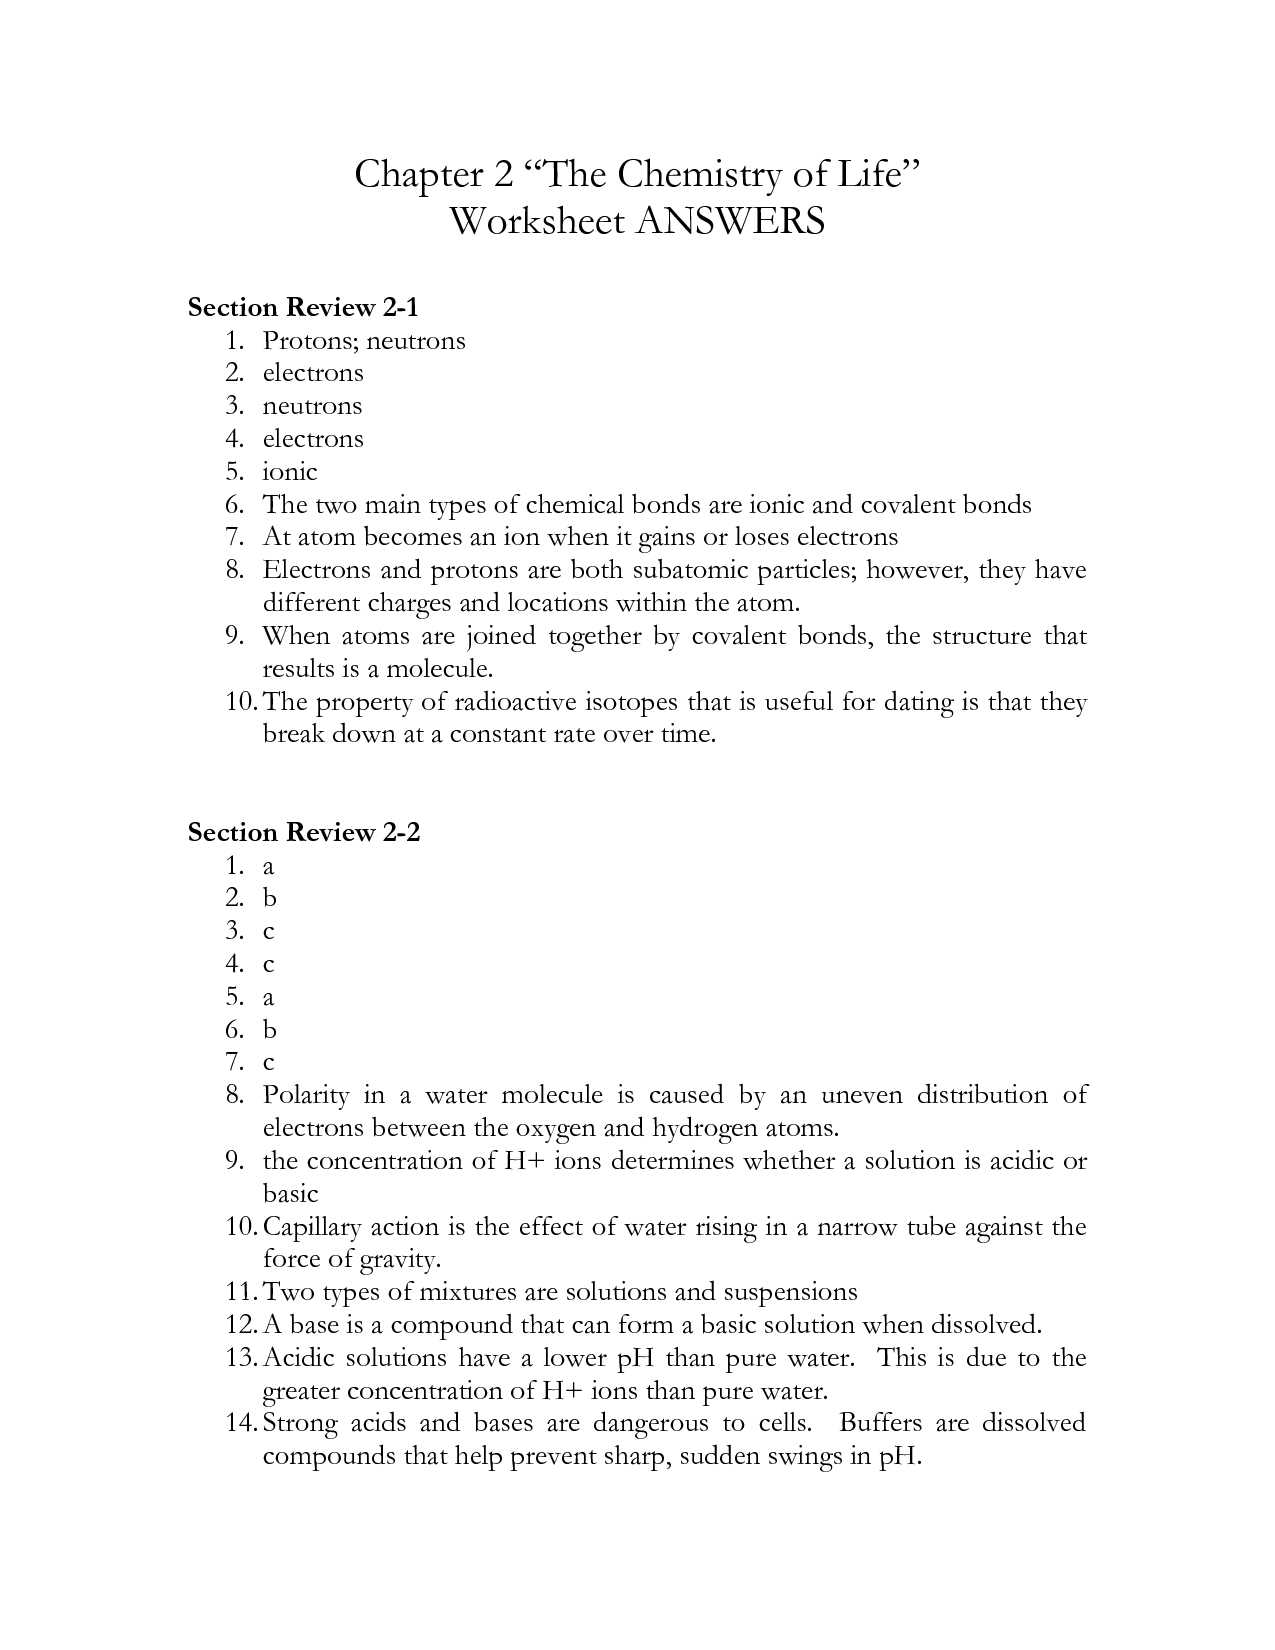 Chapter 2 the Chemistry Of Life Worksheet Answers together with Crossword Puzzle Biology Worksheet Hd Review